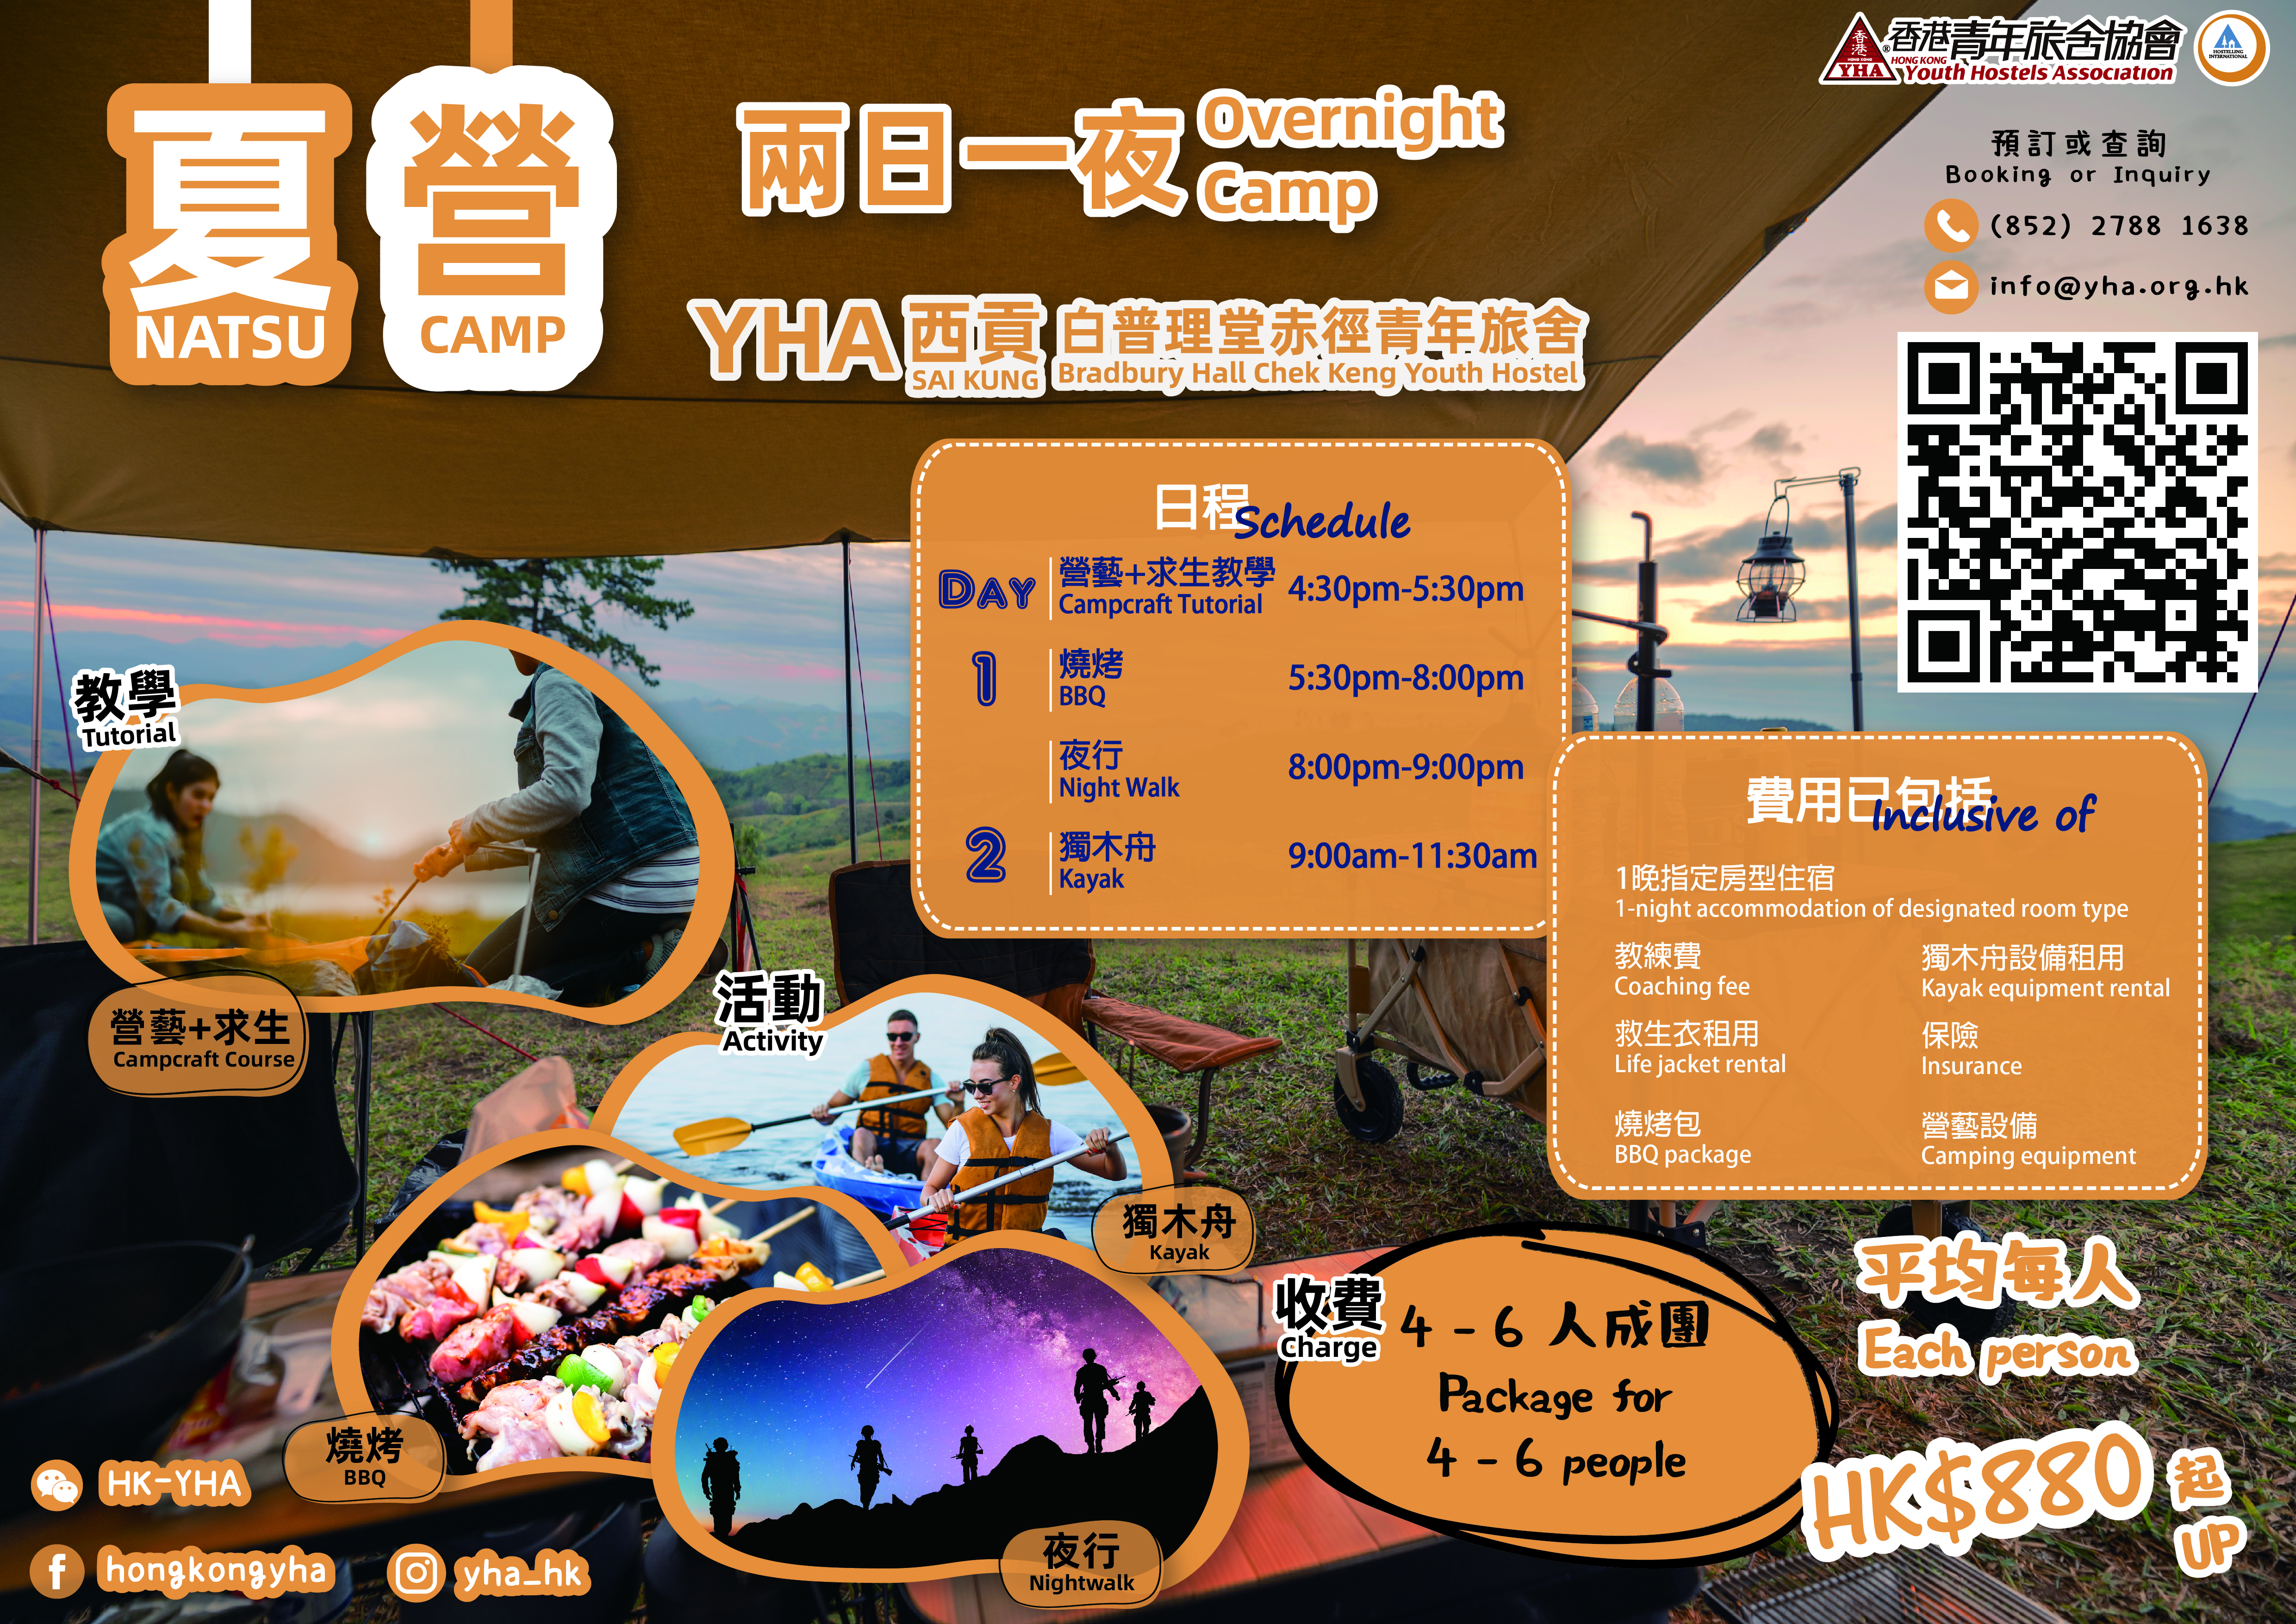 (Chek Keng) 4-Person Natsu Overnight Camp Package